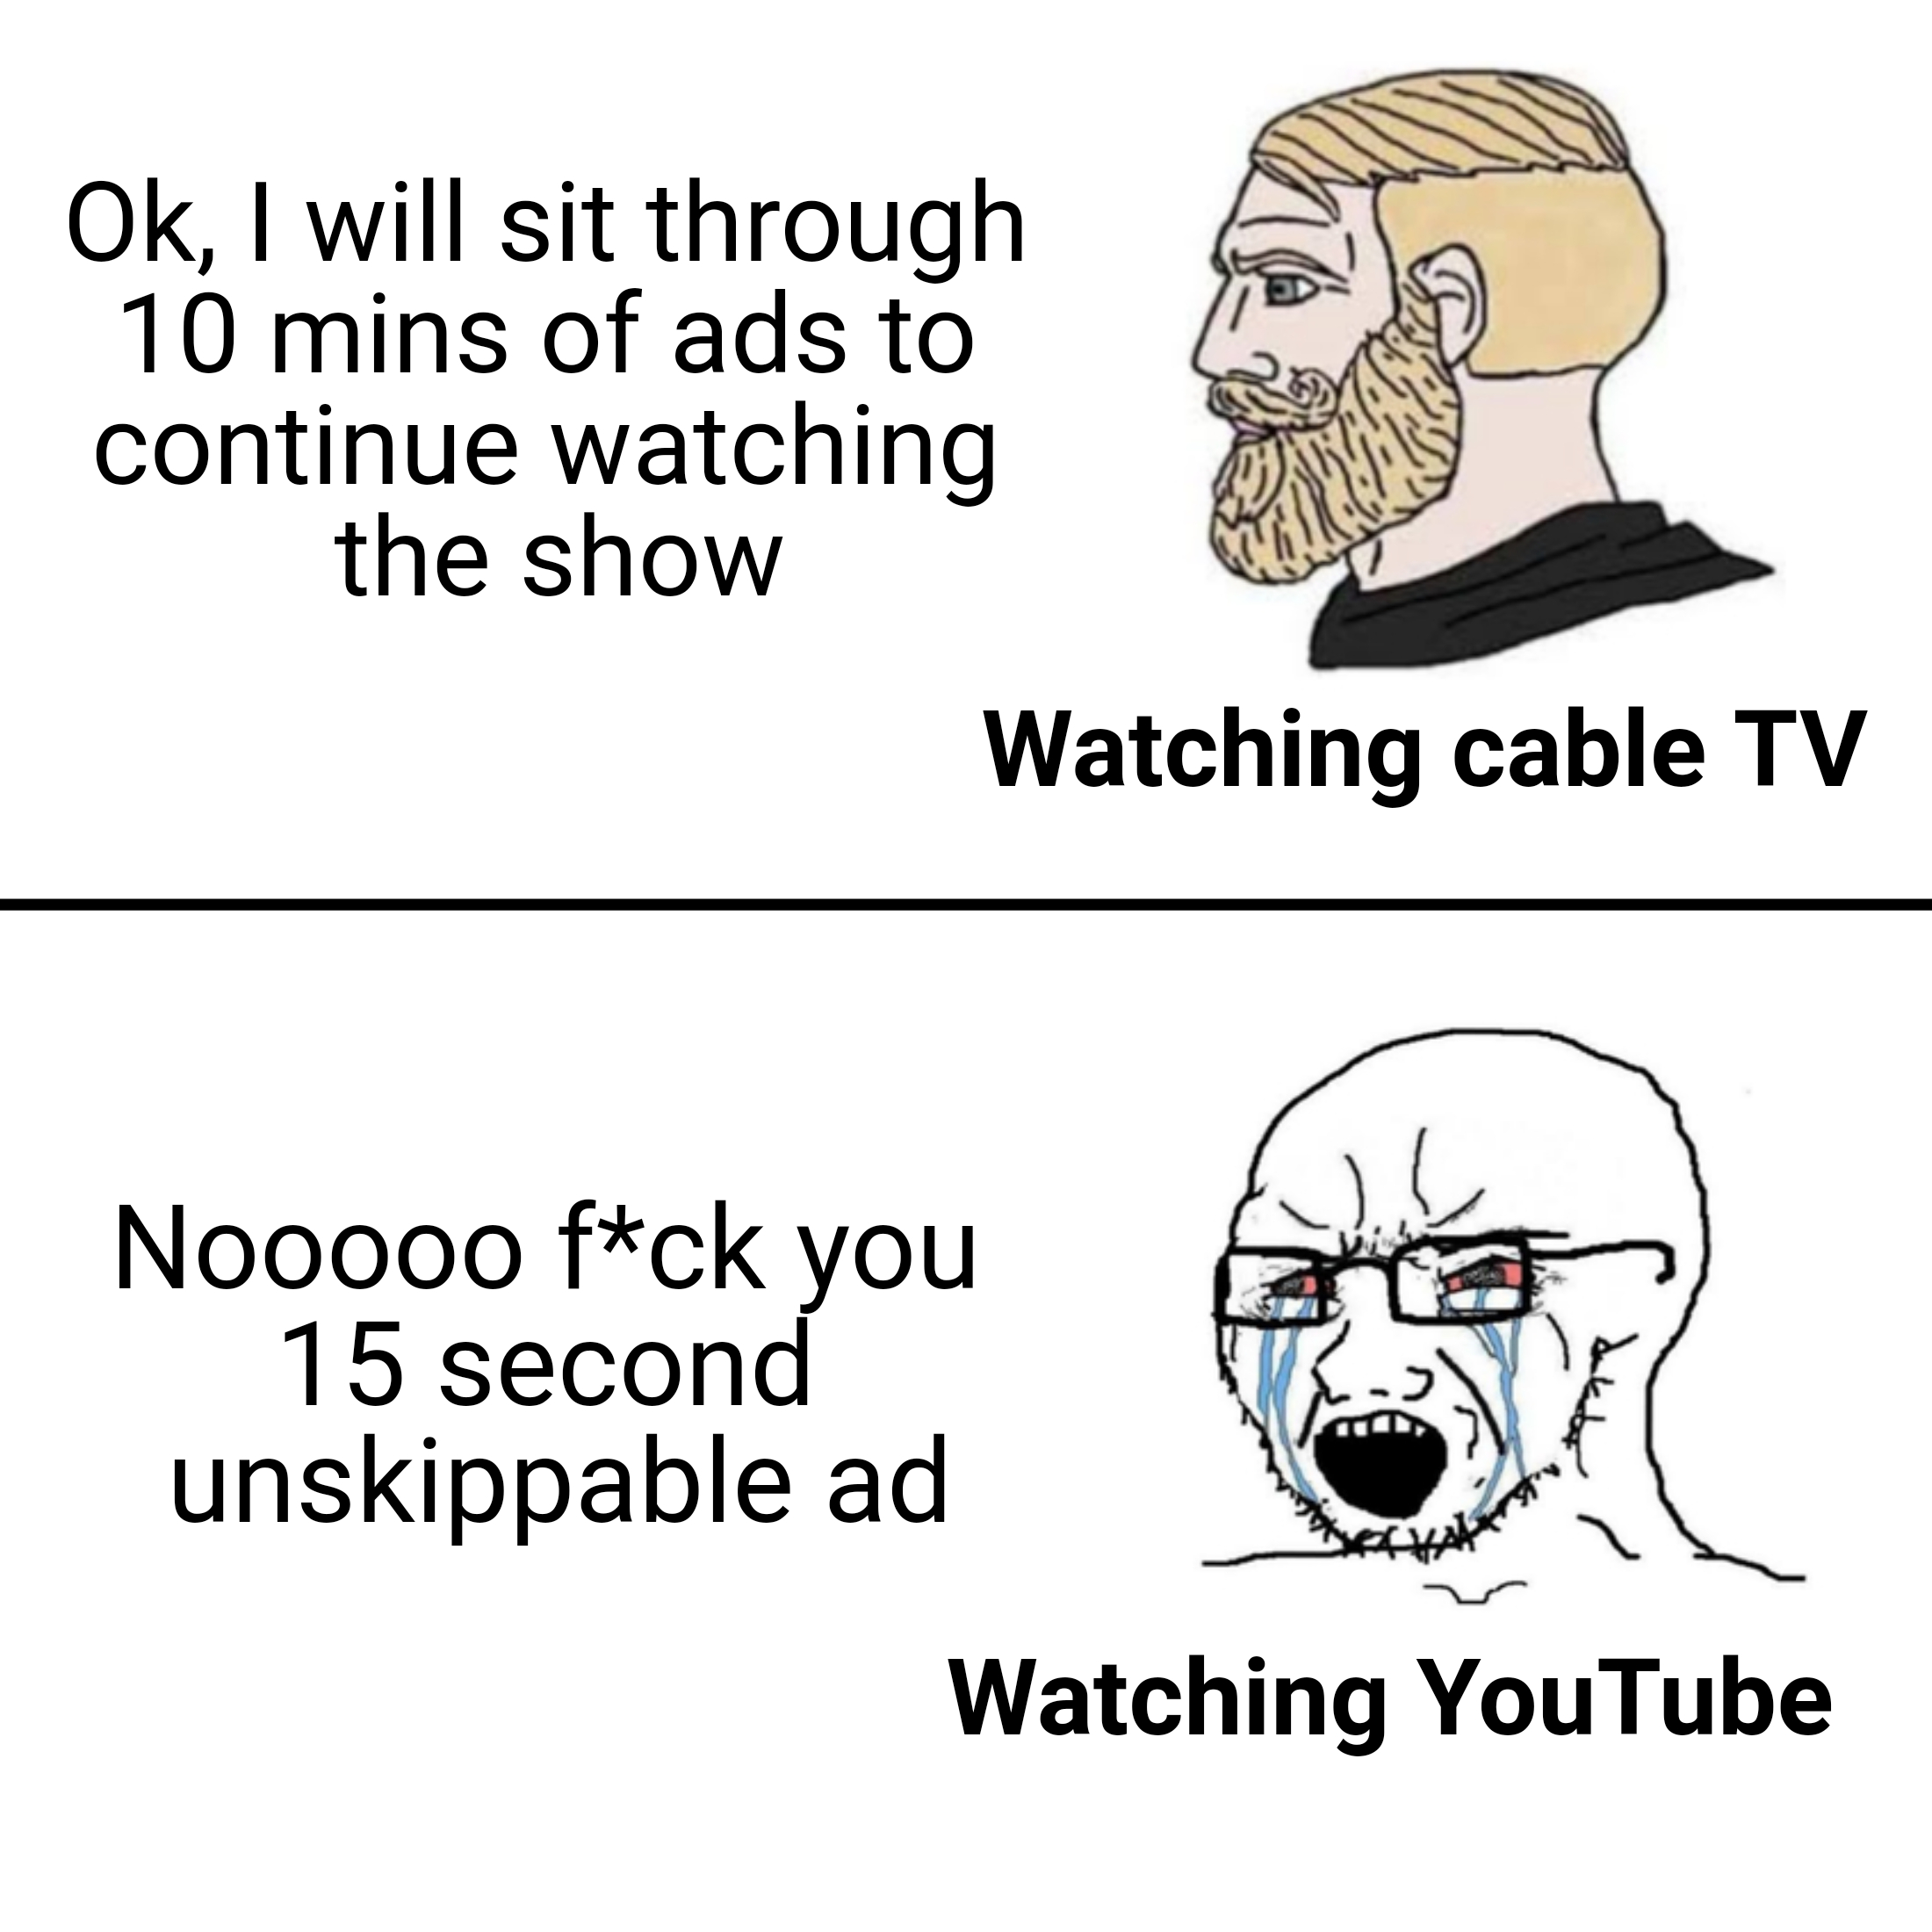 return to monke meem - Ok, I will sit through 10 mins of ads to continue watching the show Watching cable Tv Nooooo fck you 15 second unskippable ad Watching YouTube